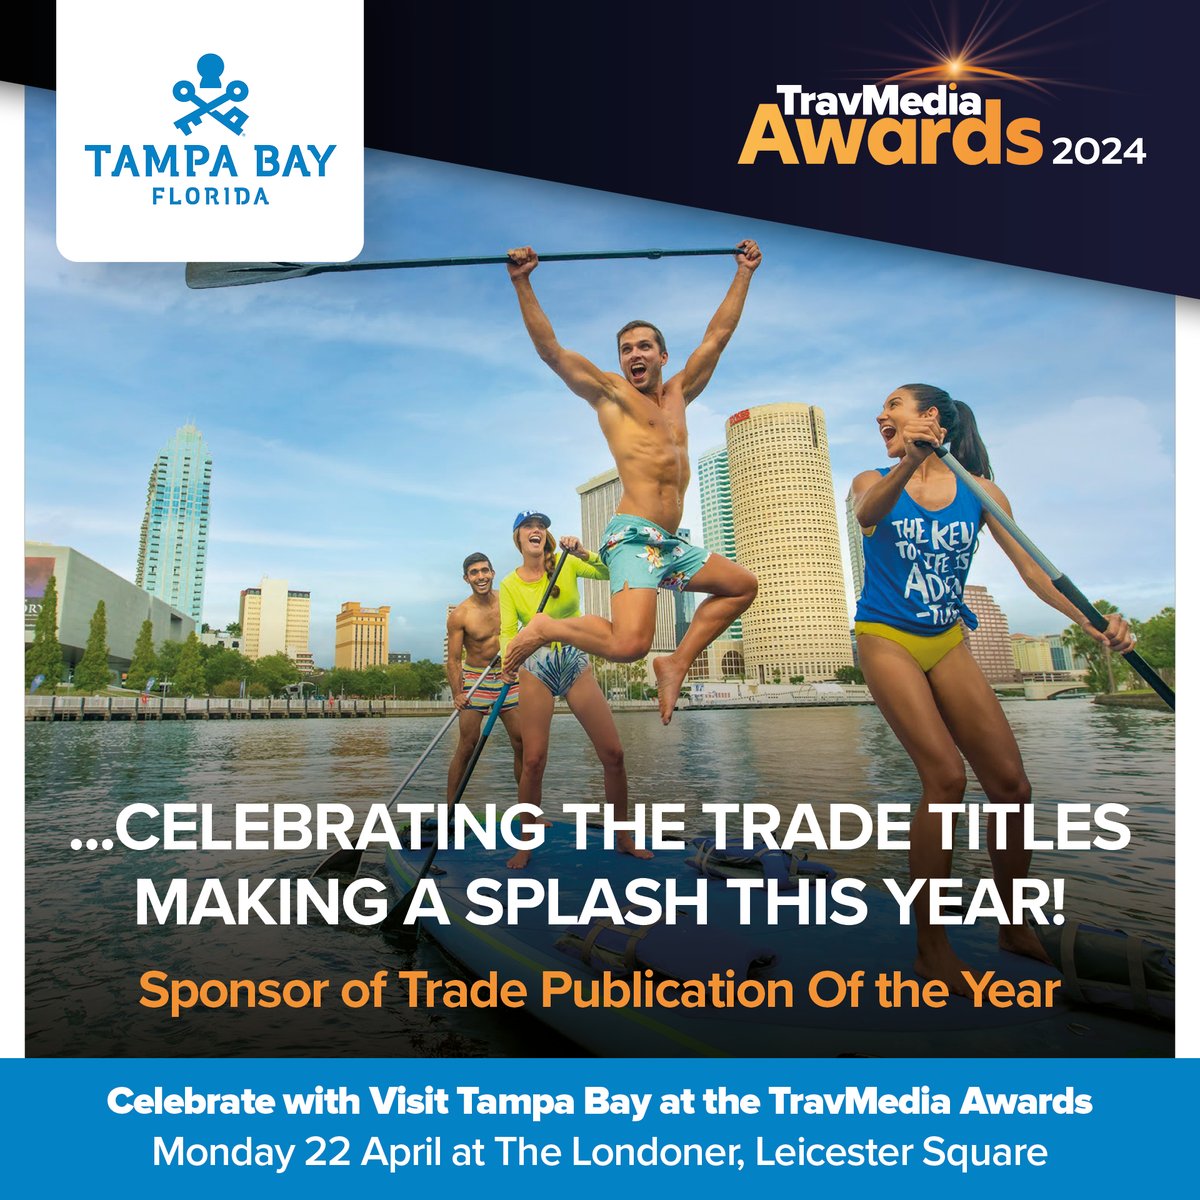 TravMedia Awards 2024: Meet the Sponsors

Visit Tampa Bay are, this year, lending their support to the vital oracles of travel, those essential reads for everyone working travel who want the inside track on our industry - the trade publications.

Thank you @VisitTampaBay for your